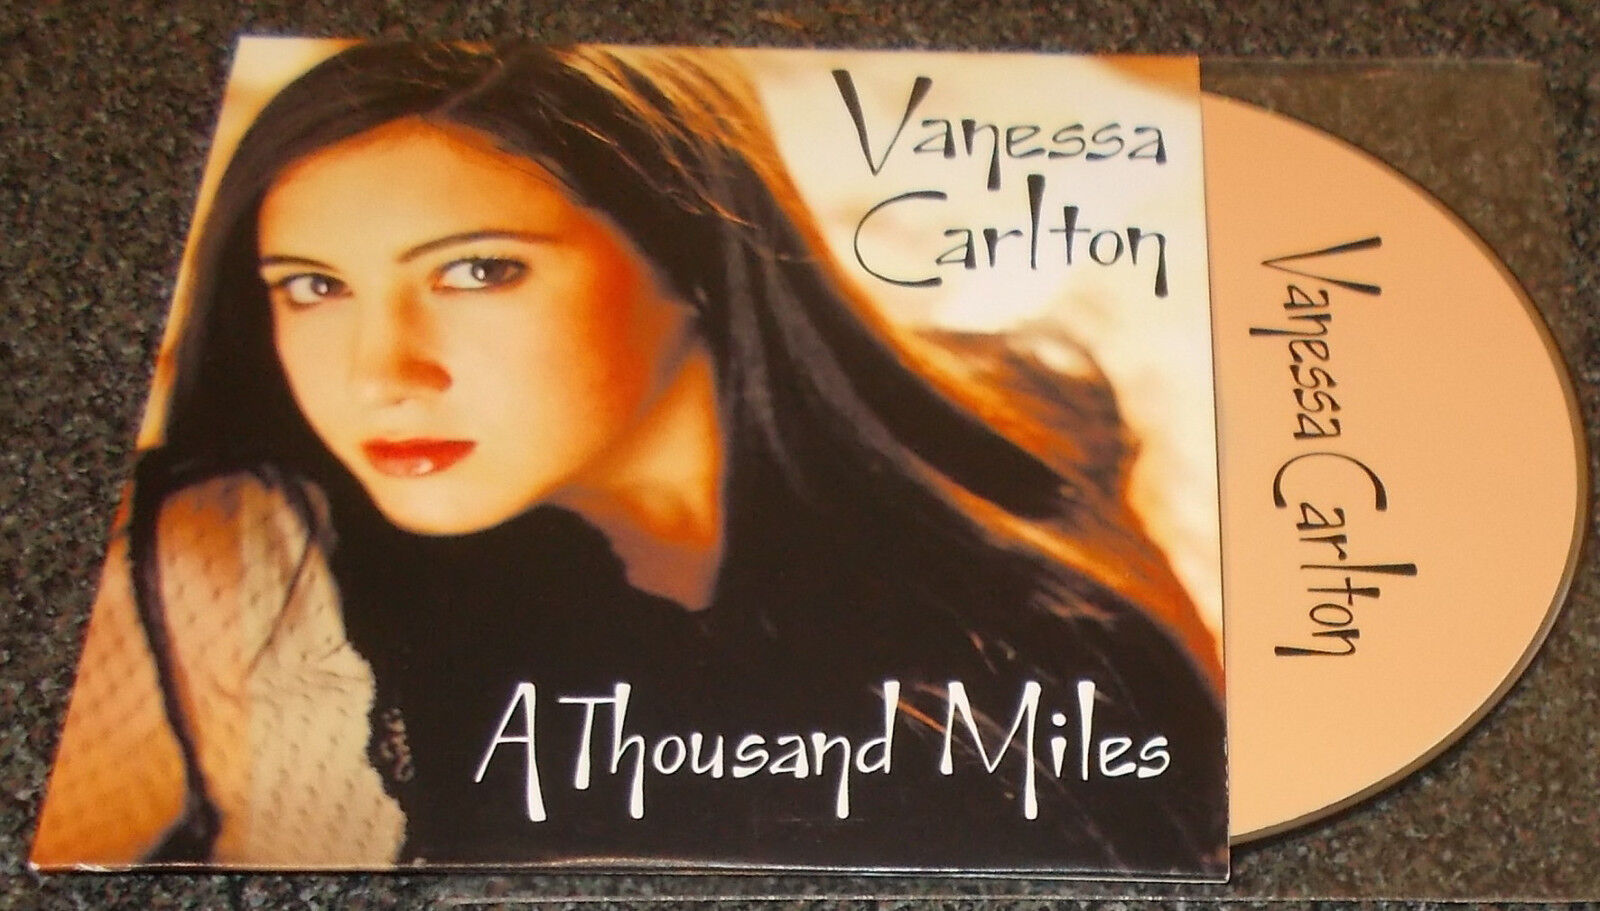 VANESSA CARLTON-A THOUSAND MILES-2002 FRENCH CD-CARD CASE-TWILIGHT (LIVE)-MINT